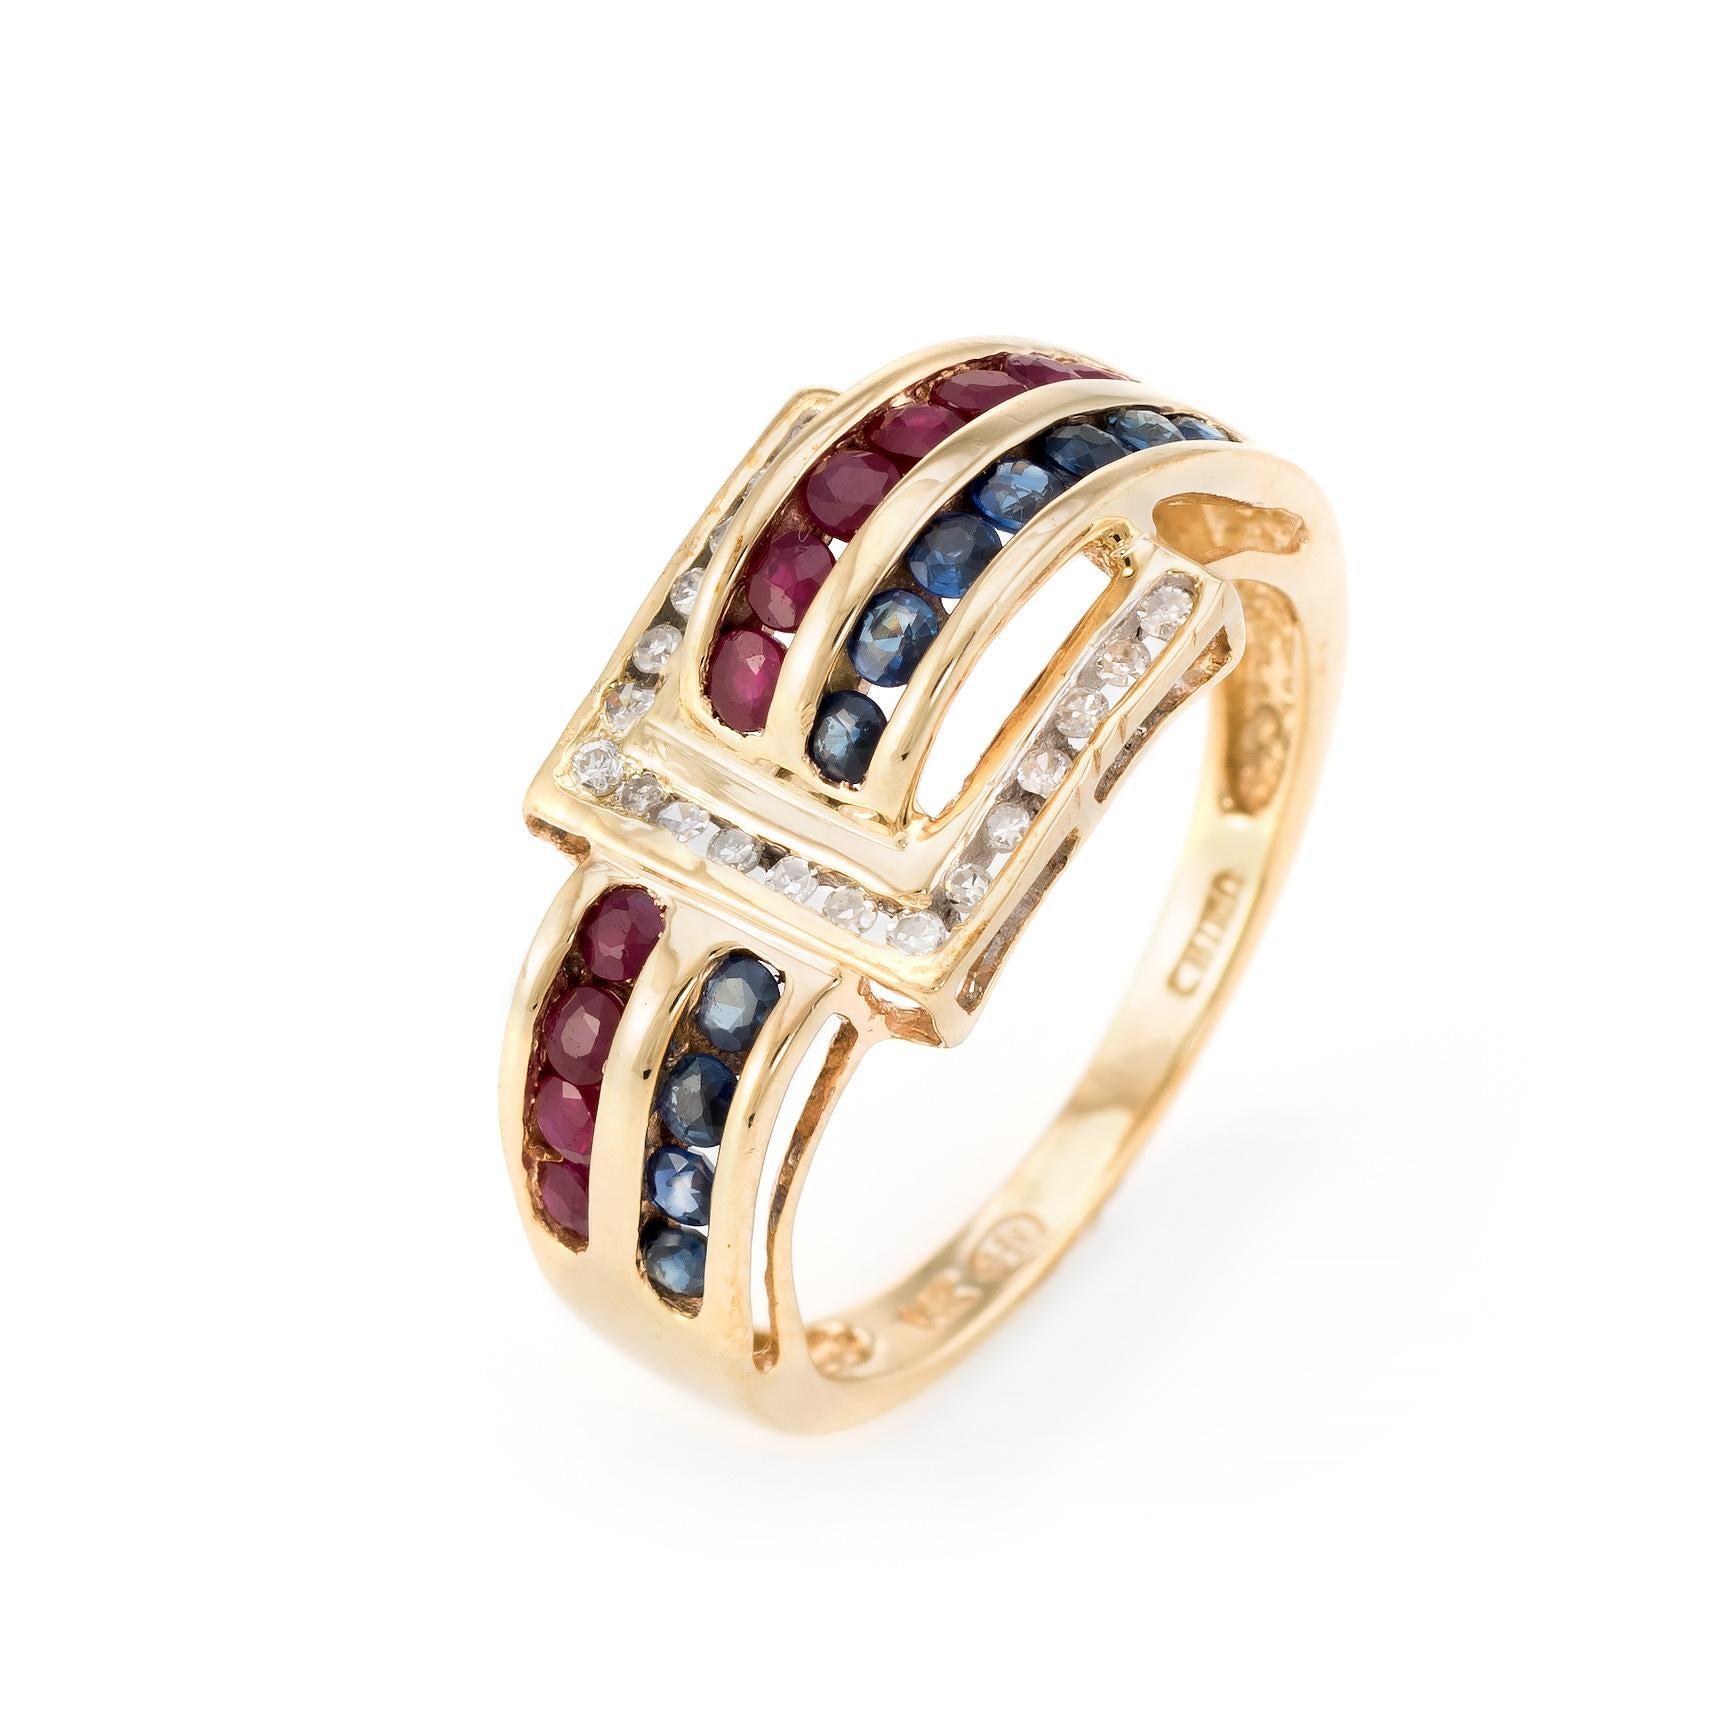 Elegant vintage buckle ring, crafted in 14 karat yellow gold. 

11 faceted round cut sapphire are estimated at 0.02 carats each (0.22 carats total estimated weight), accented with 11 estimated 0.02 carat rubies (0.22 carats total estimated weight).